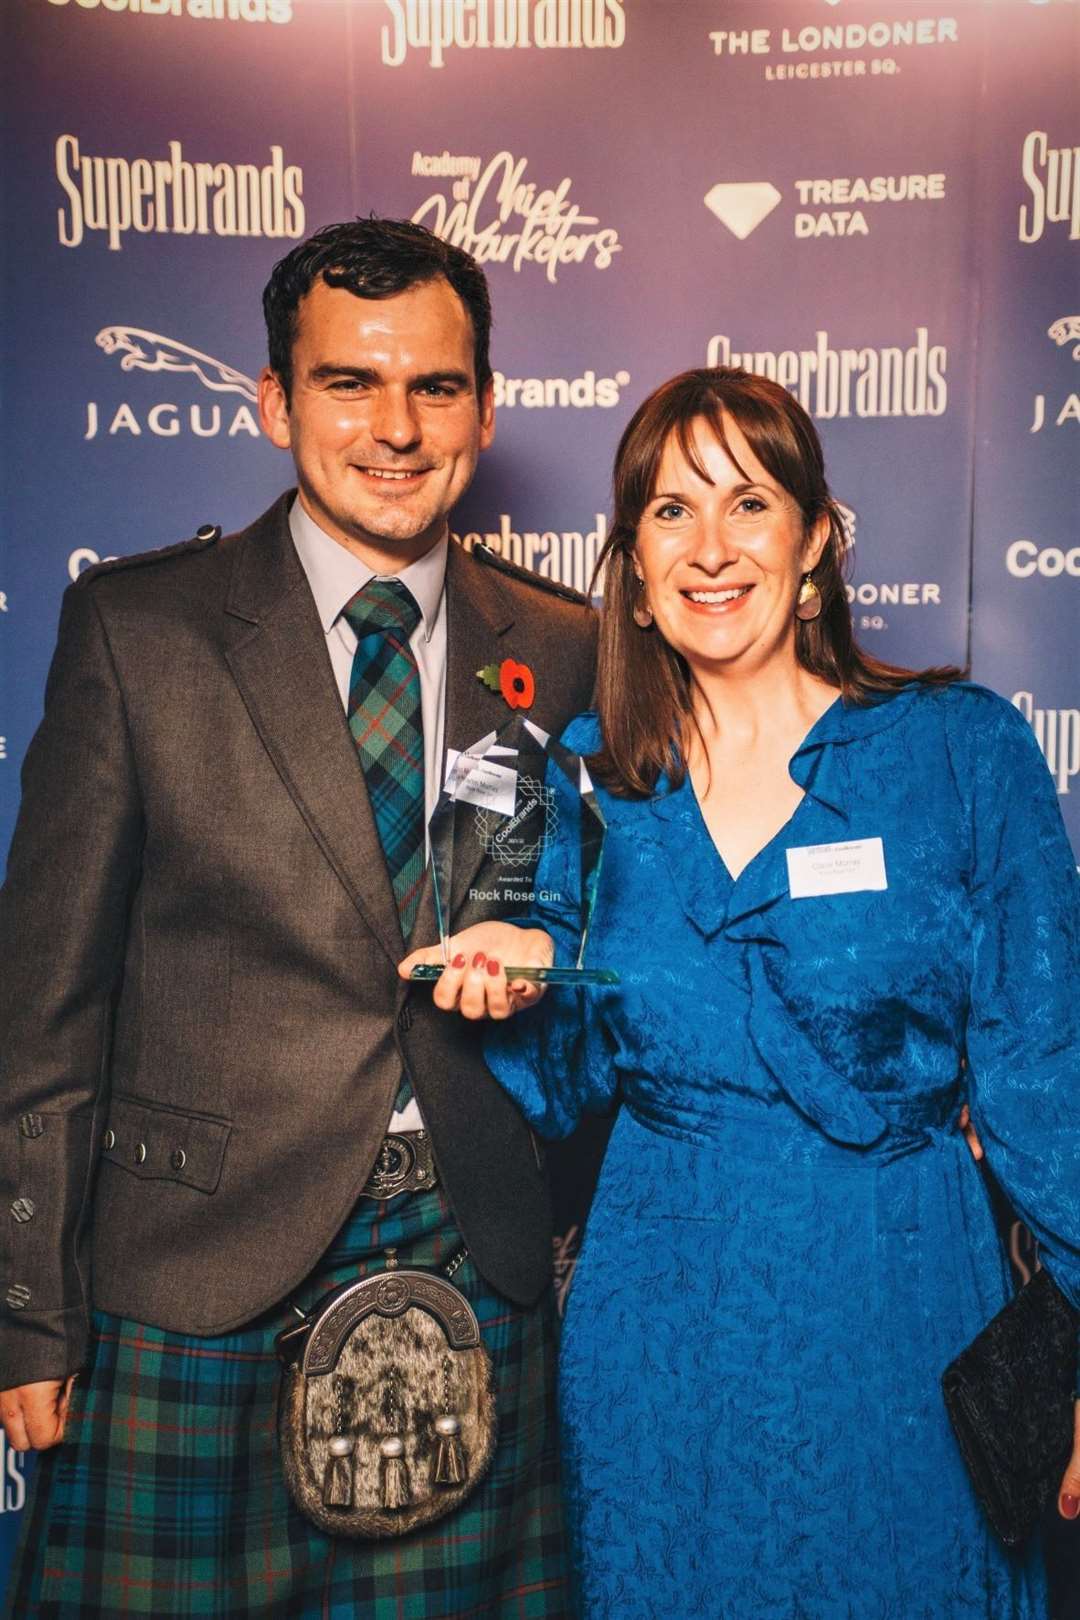 Martin and Claire Murray picked up a prestigious CoolBrands award for Rock Rose Gin at a special event in London.